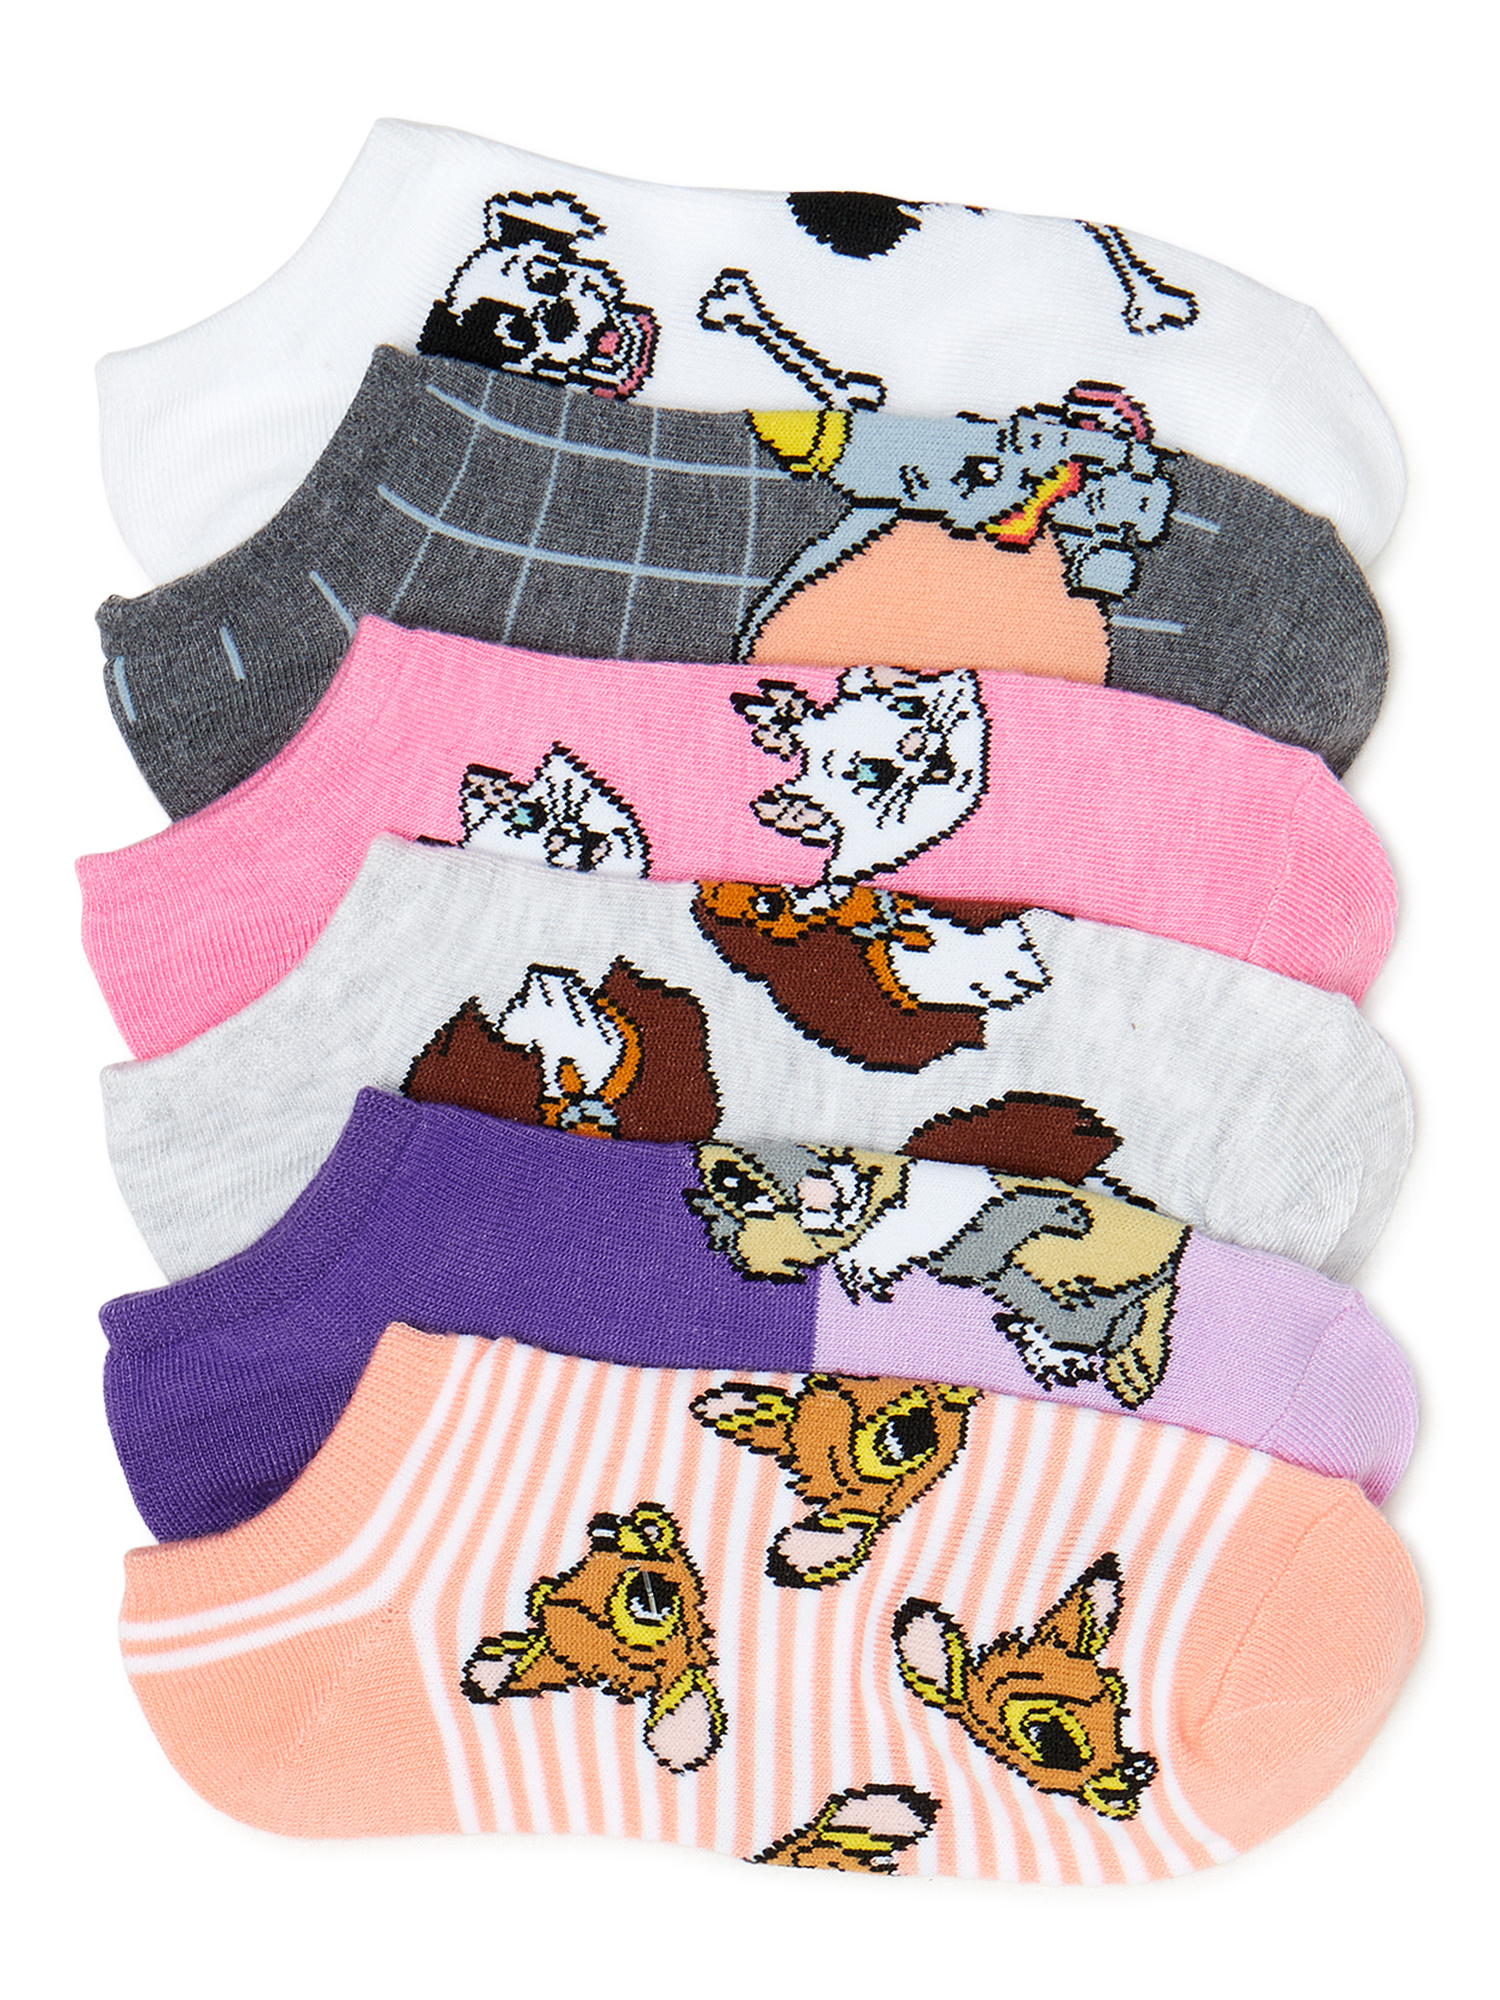 Disney Womens No Show Socks Pack of 6 Size 4-10